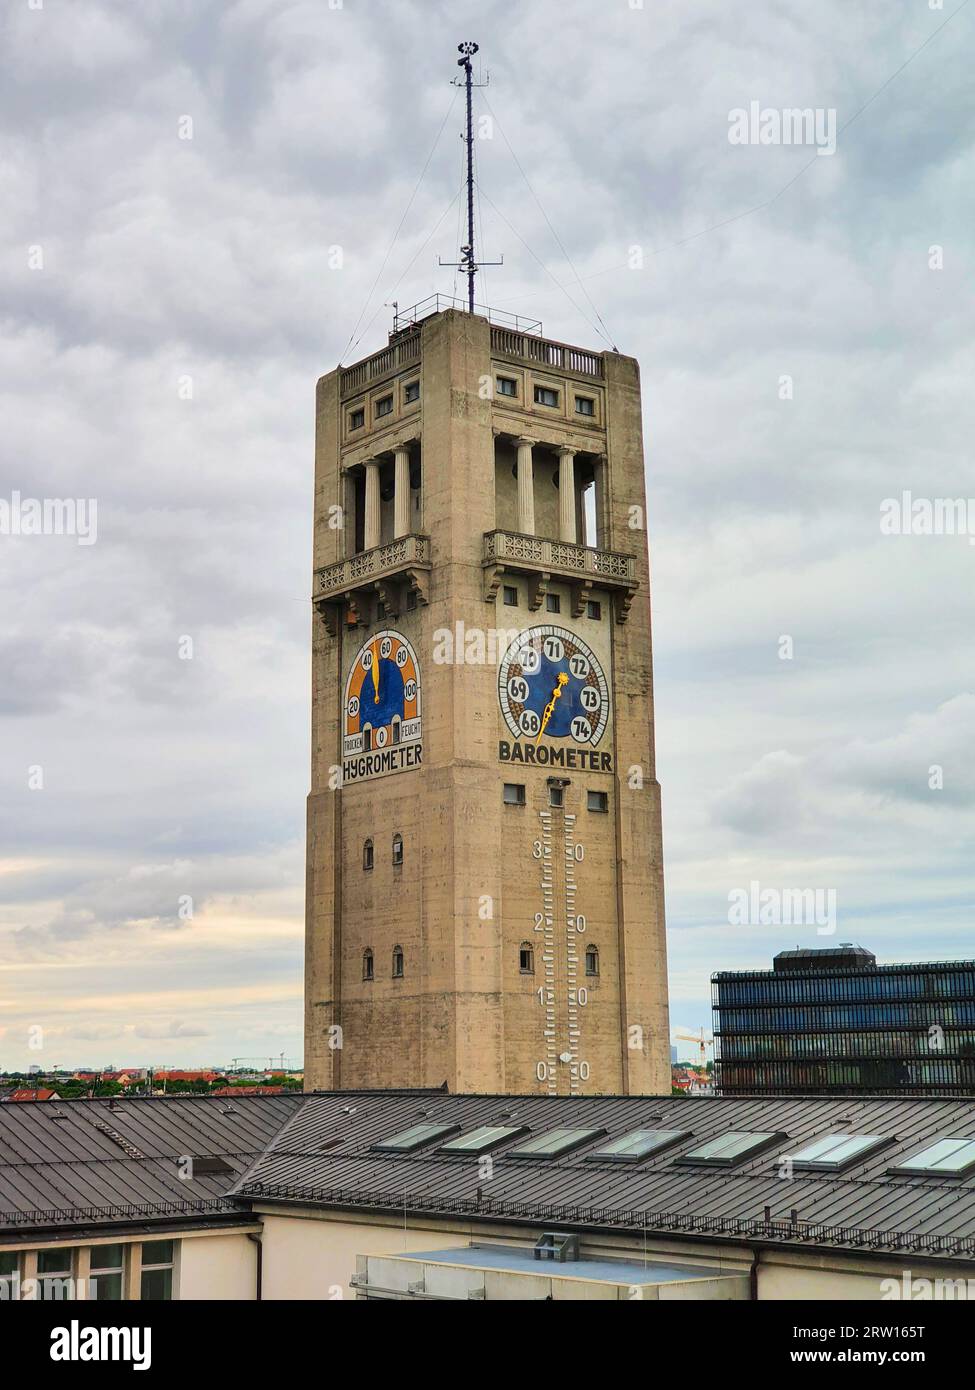 Munich, Germany - July 07, 2021: Deutsches Museum or German Museum of Masterpieces of Science and Technology tower with thermometer, barometer and hyg Stock Photo